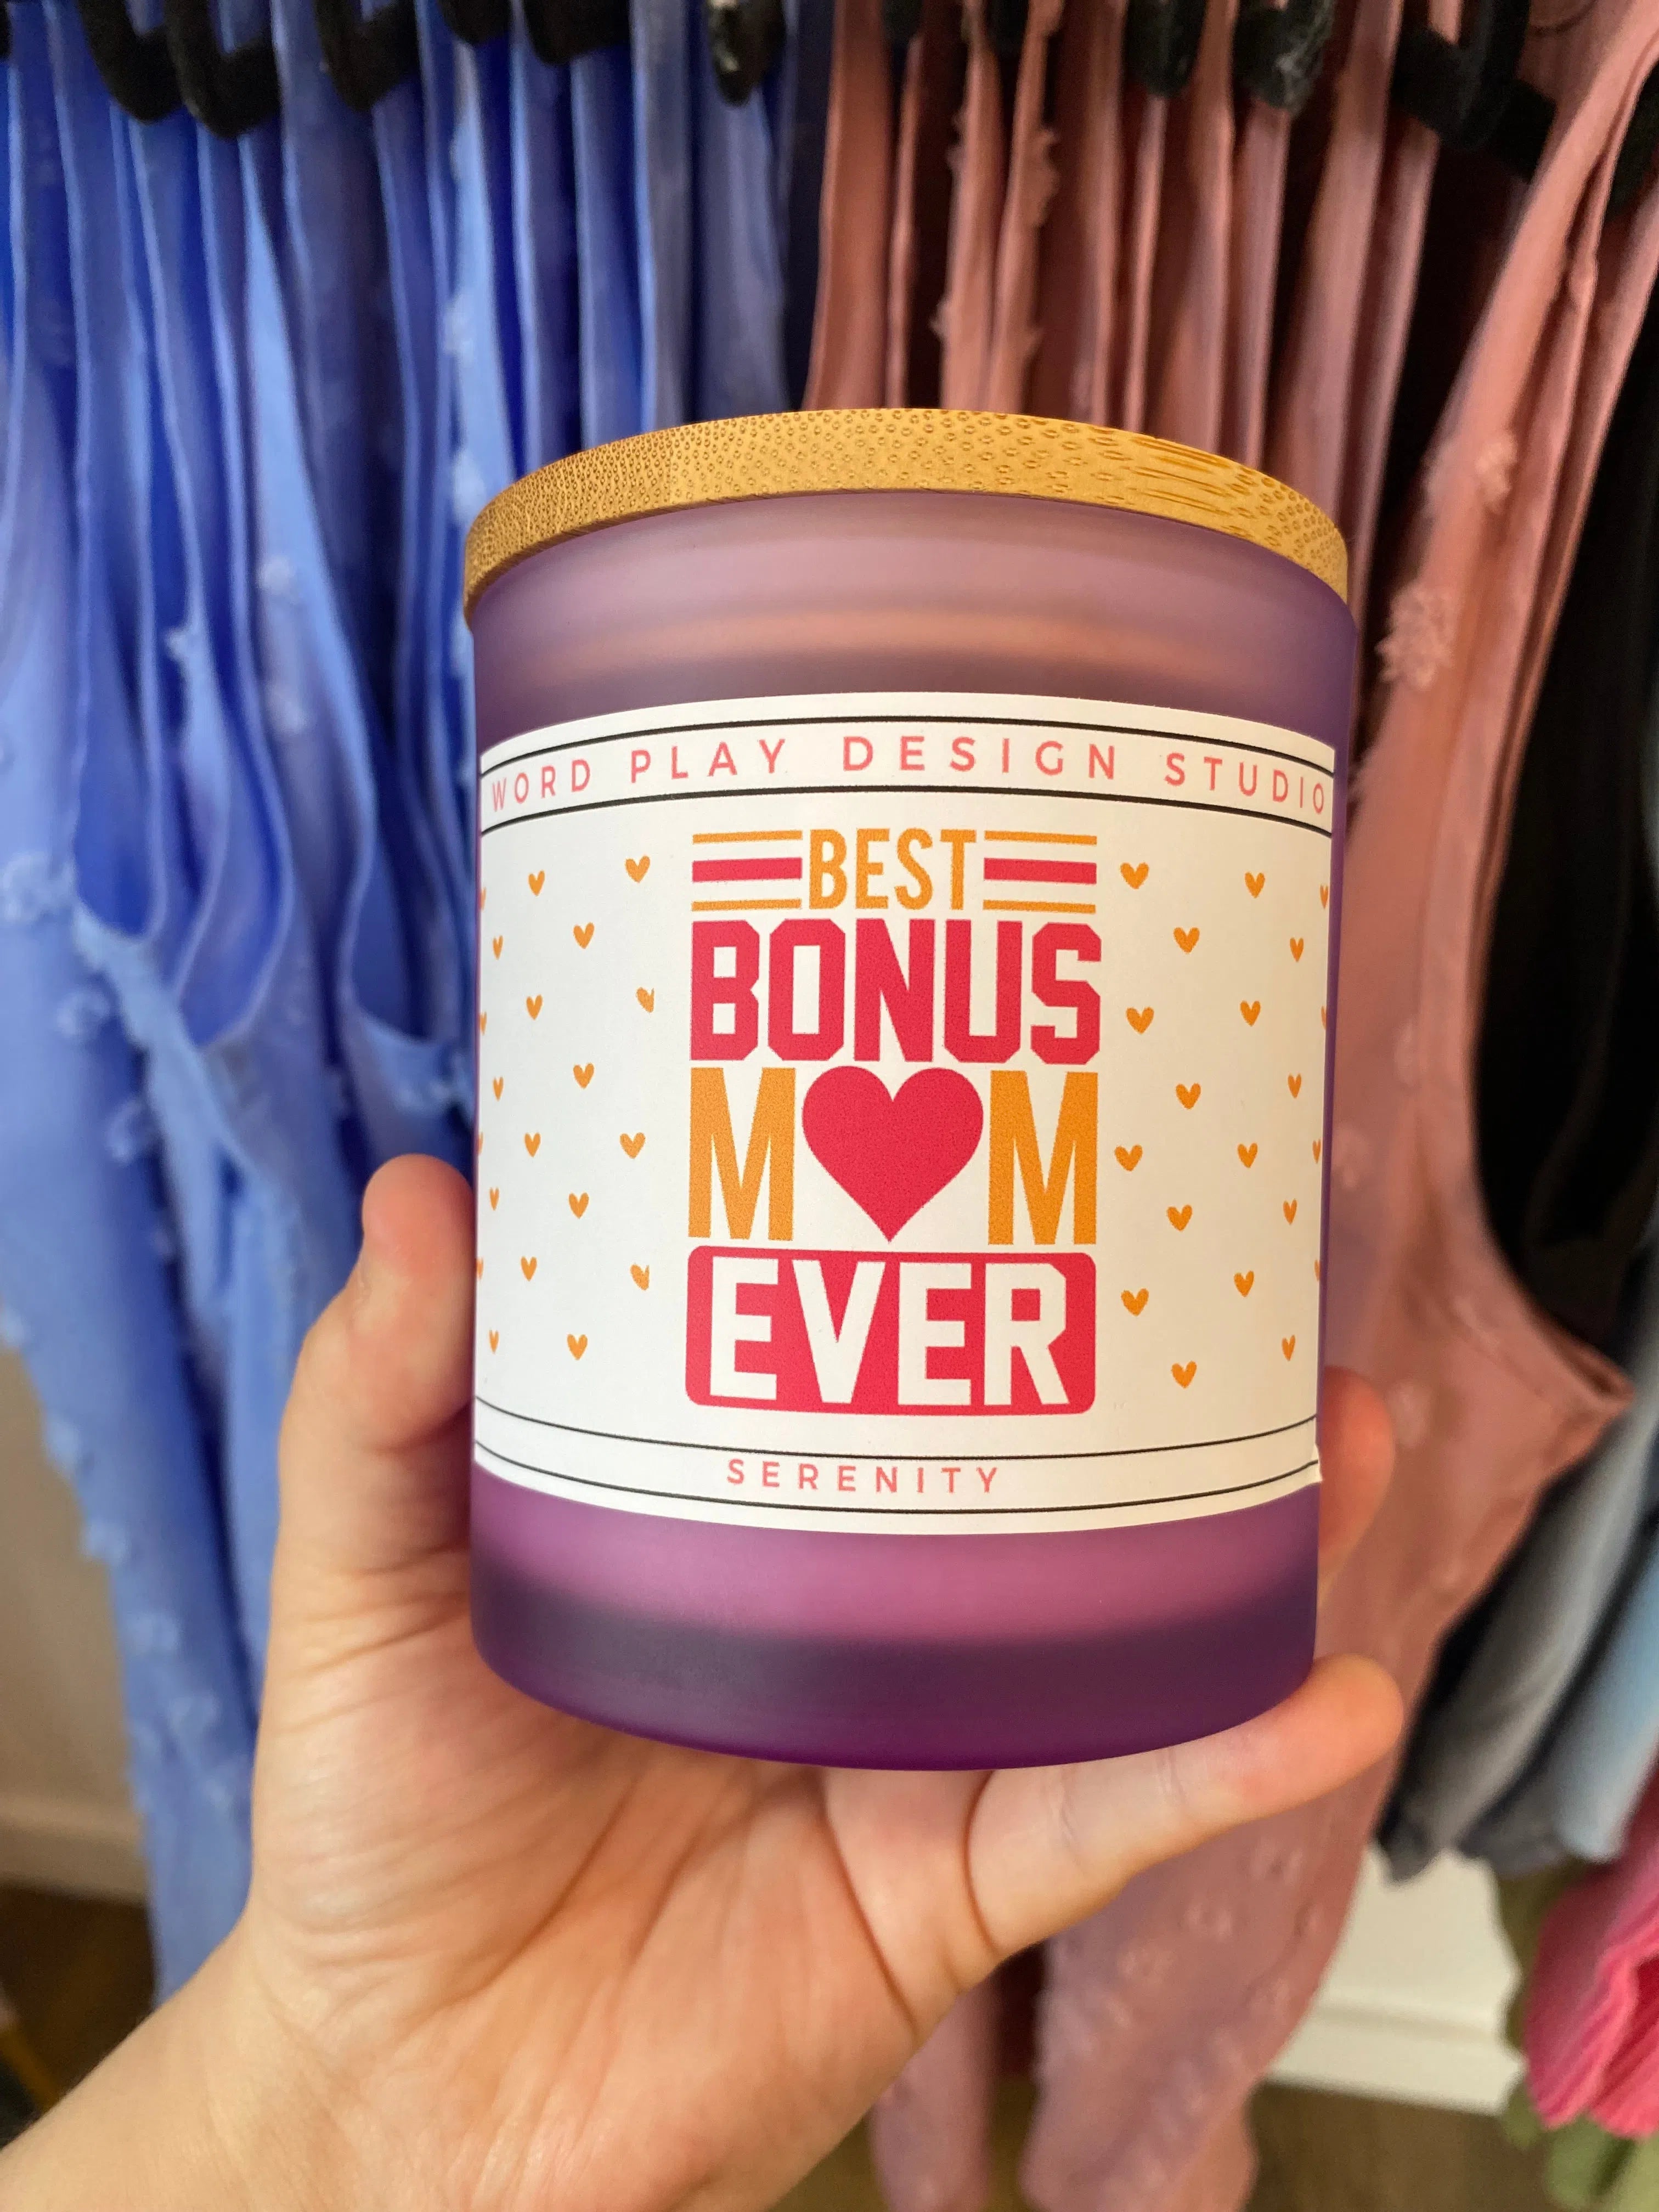 Shop Best Bonus Mom Ever | Serenity-Candles at Ruby Joy Boutique, a Women's Clothing Store in Pickerington, Ohio